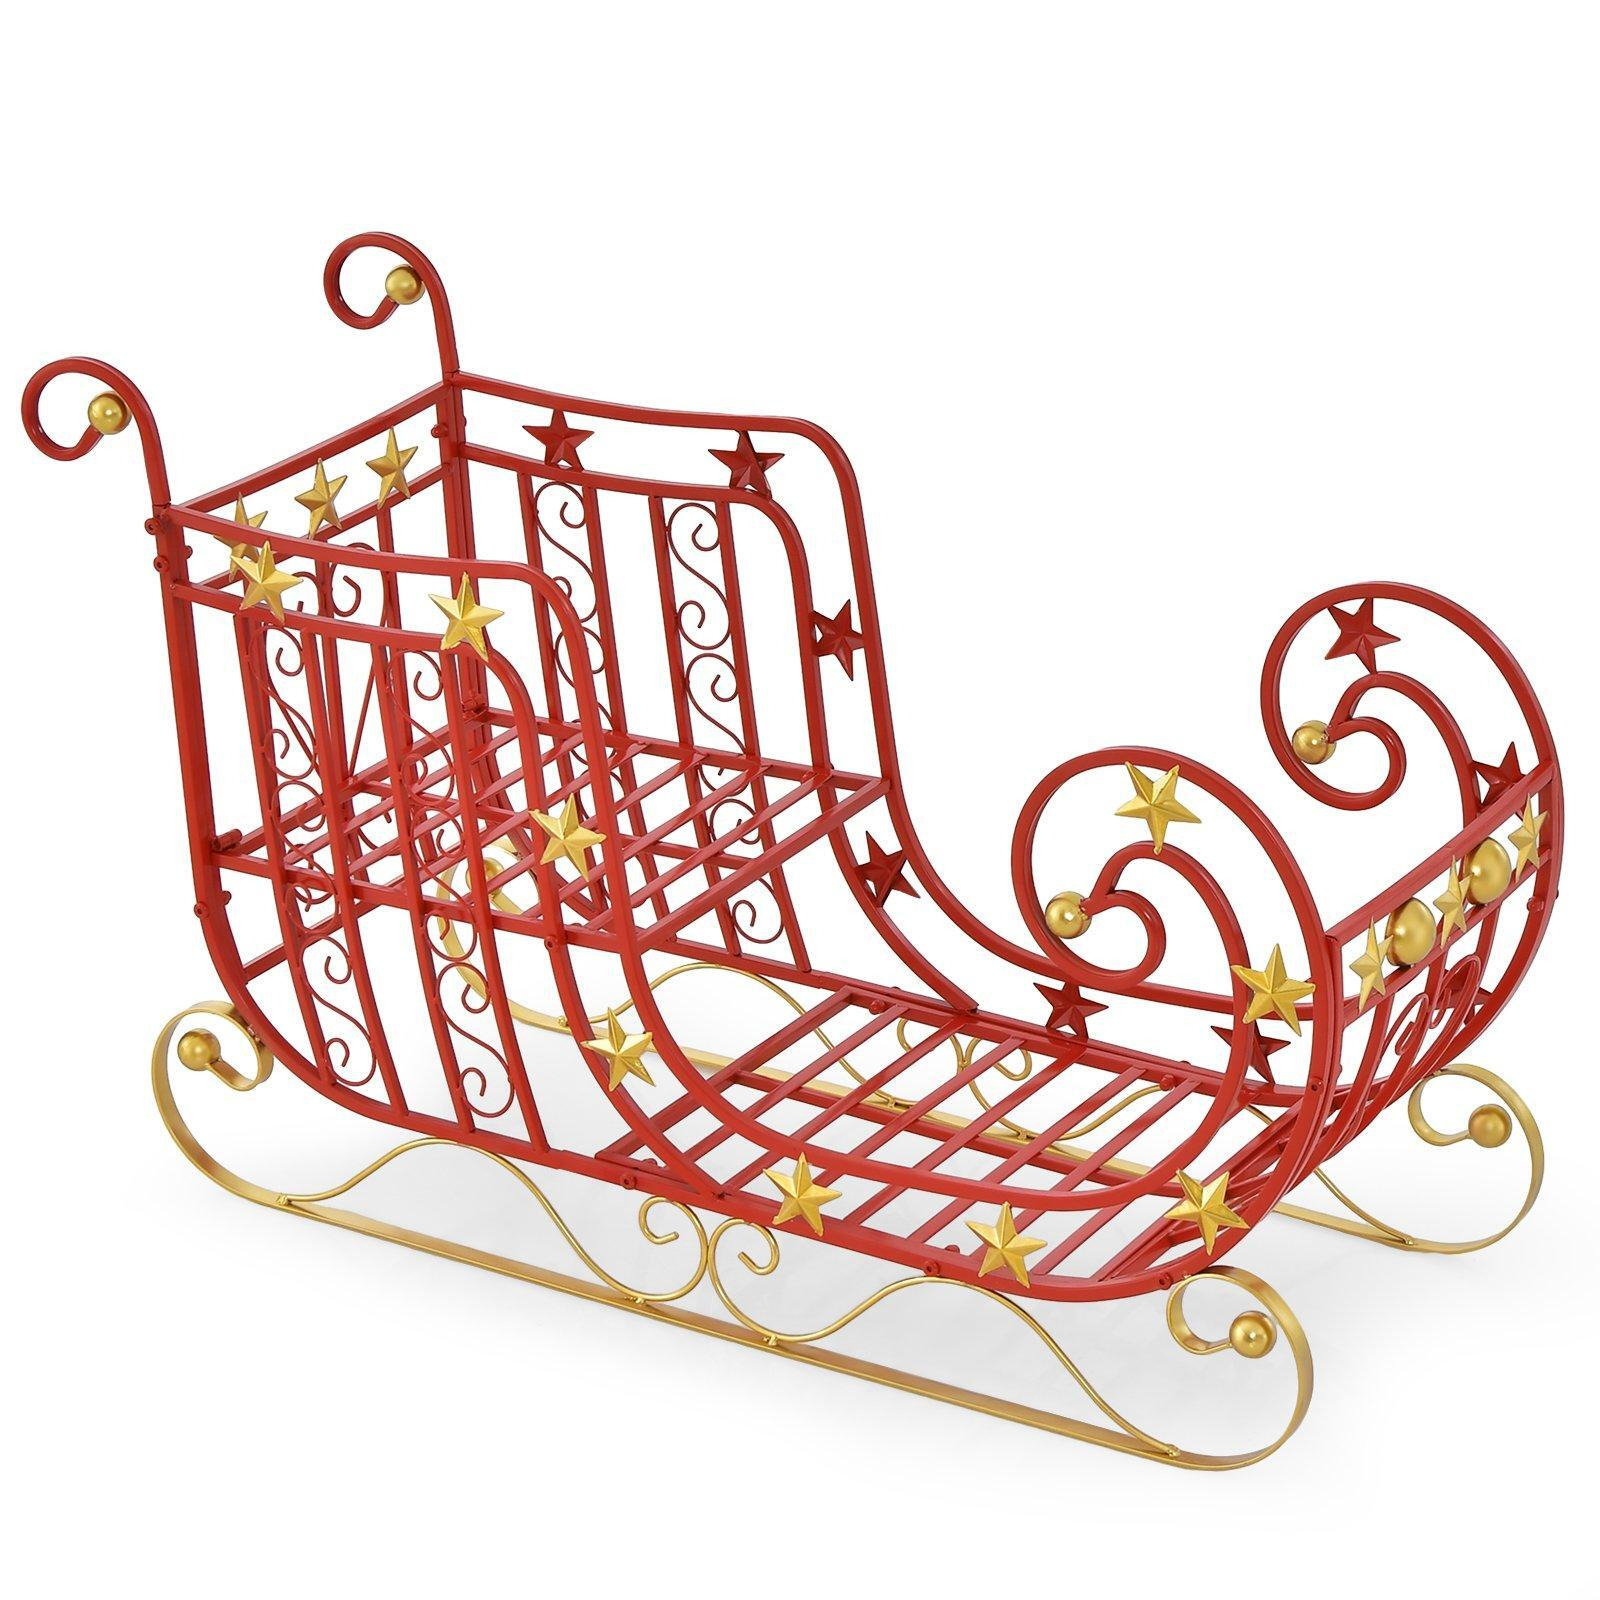 Red Santa Sleigh Metal Christmas Santa Sleigh w/ Large Cargo Area for Gifts - image 1